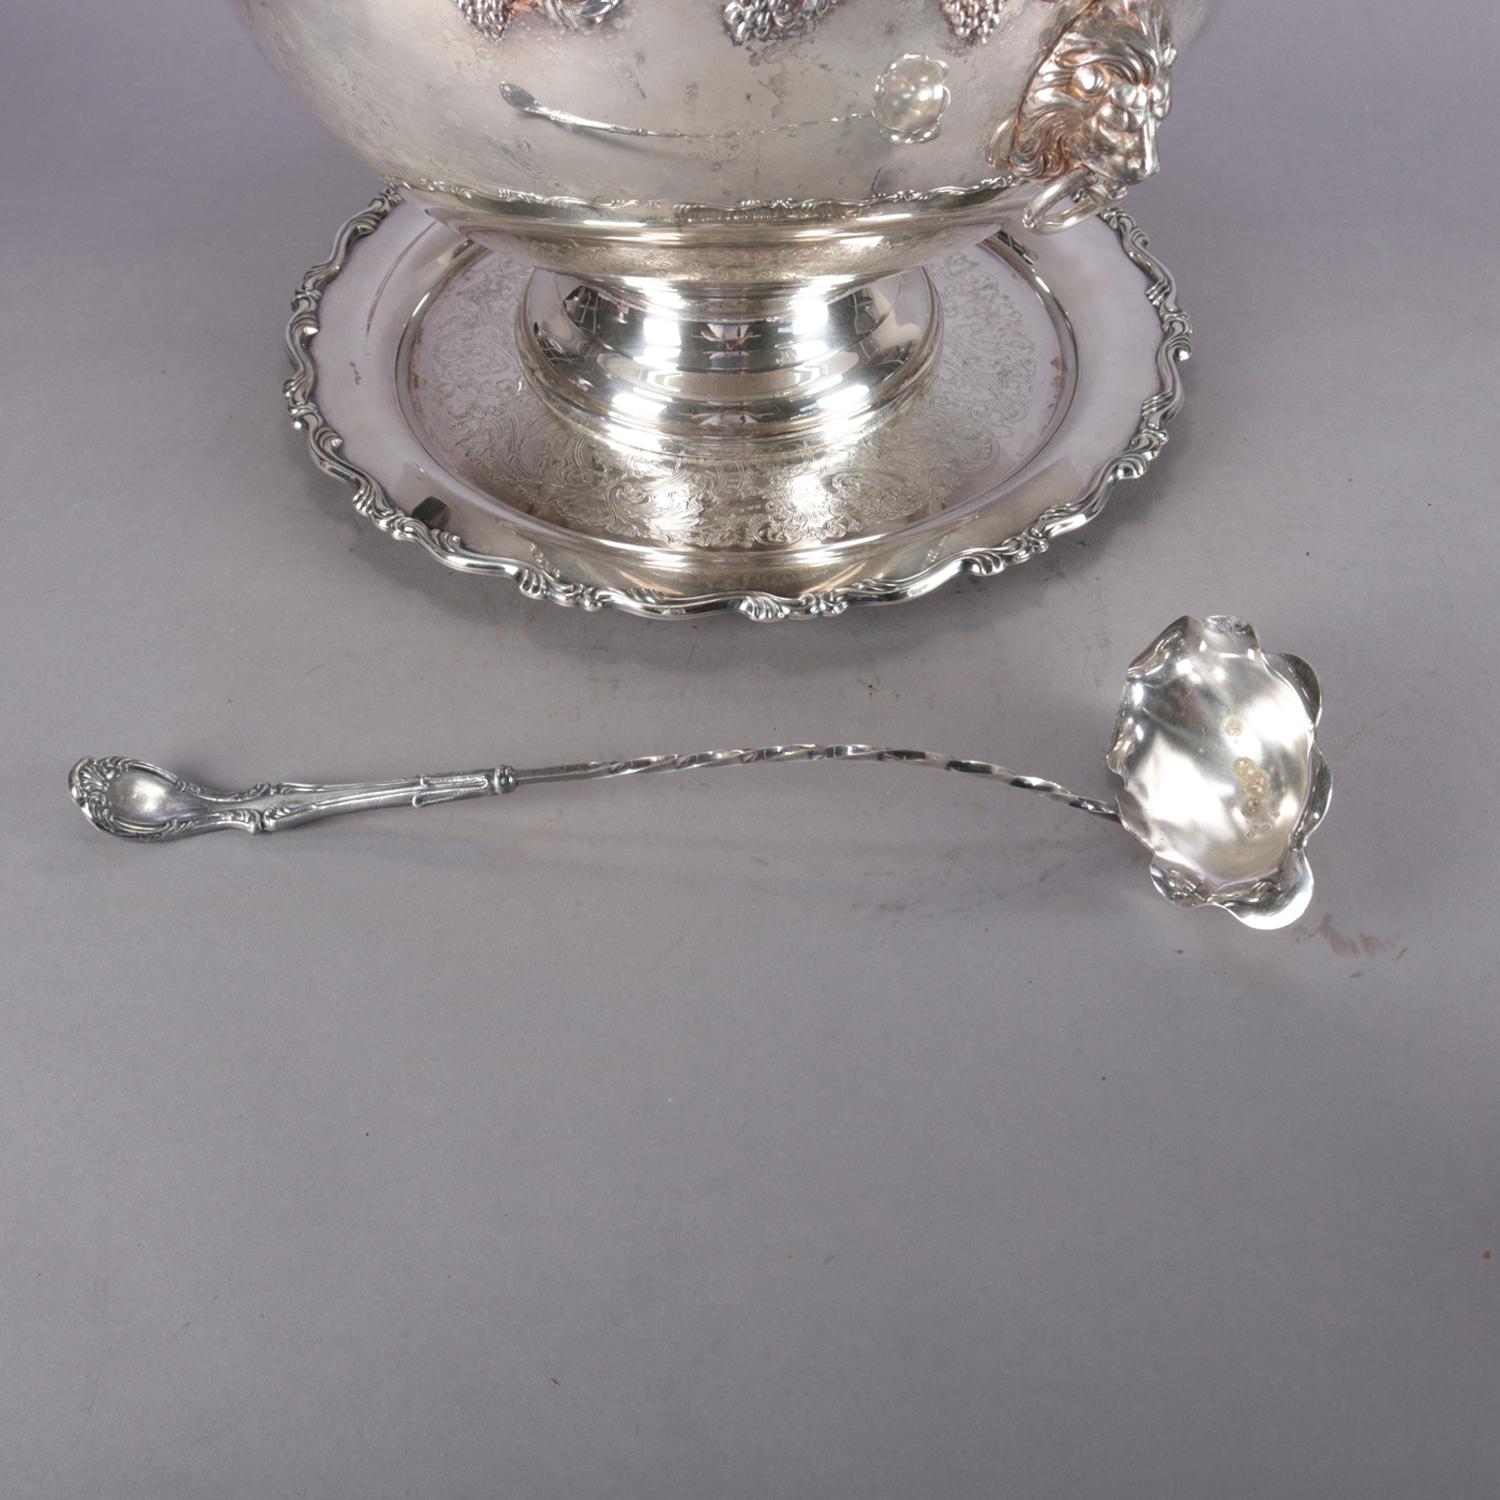 Silver Plate Antique Victorian Grape & Leaf Silverplate Punch Bowl and Cup Set by Oneida